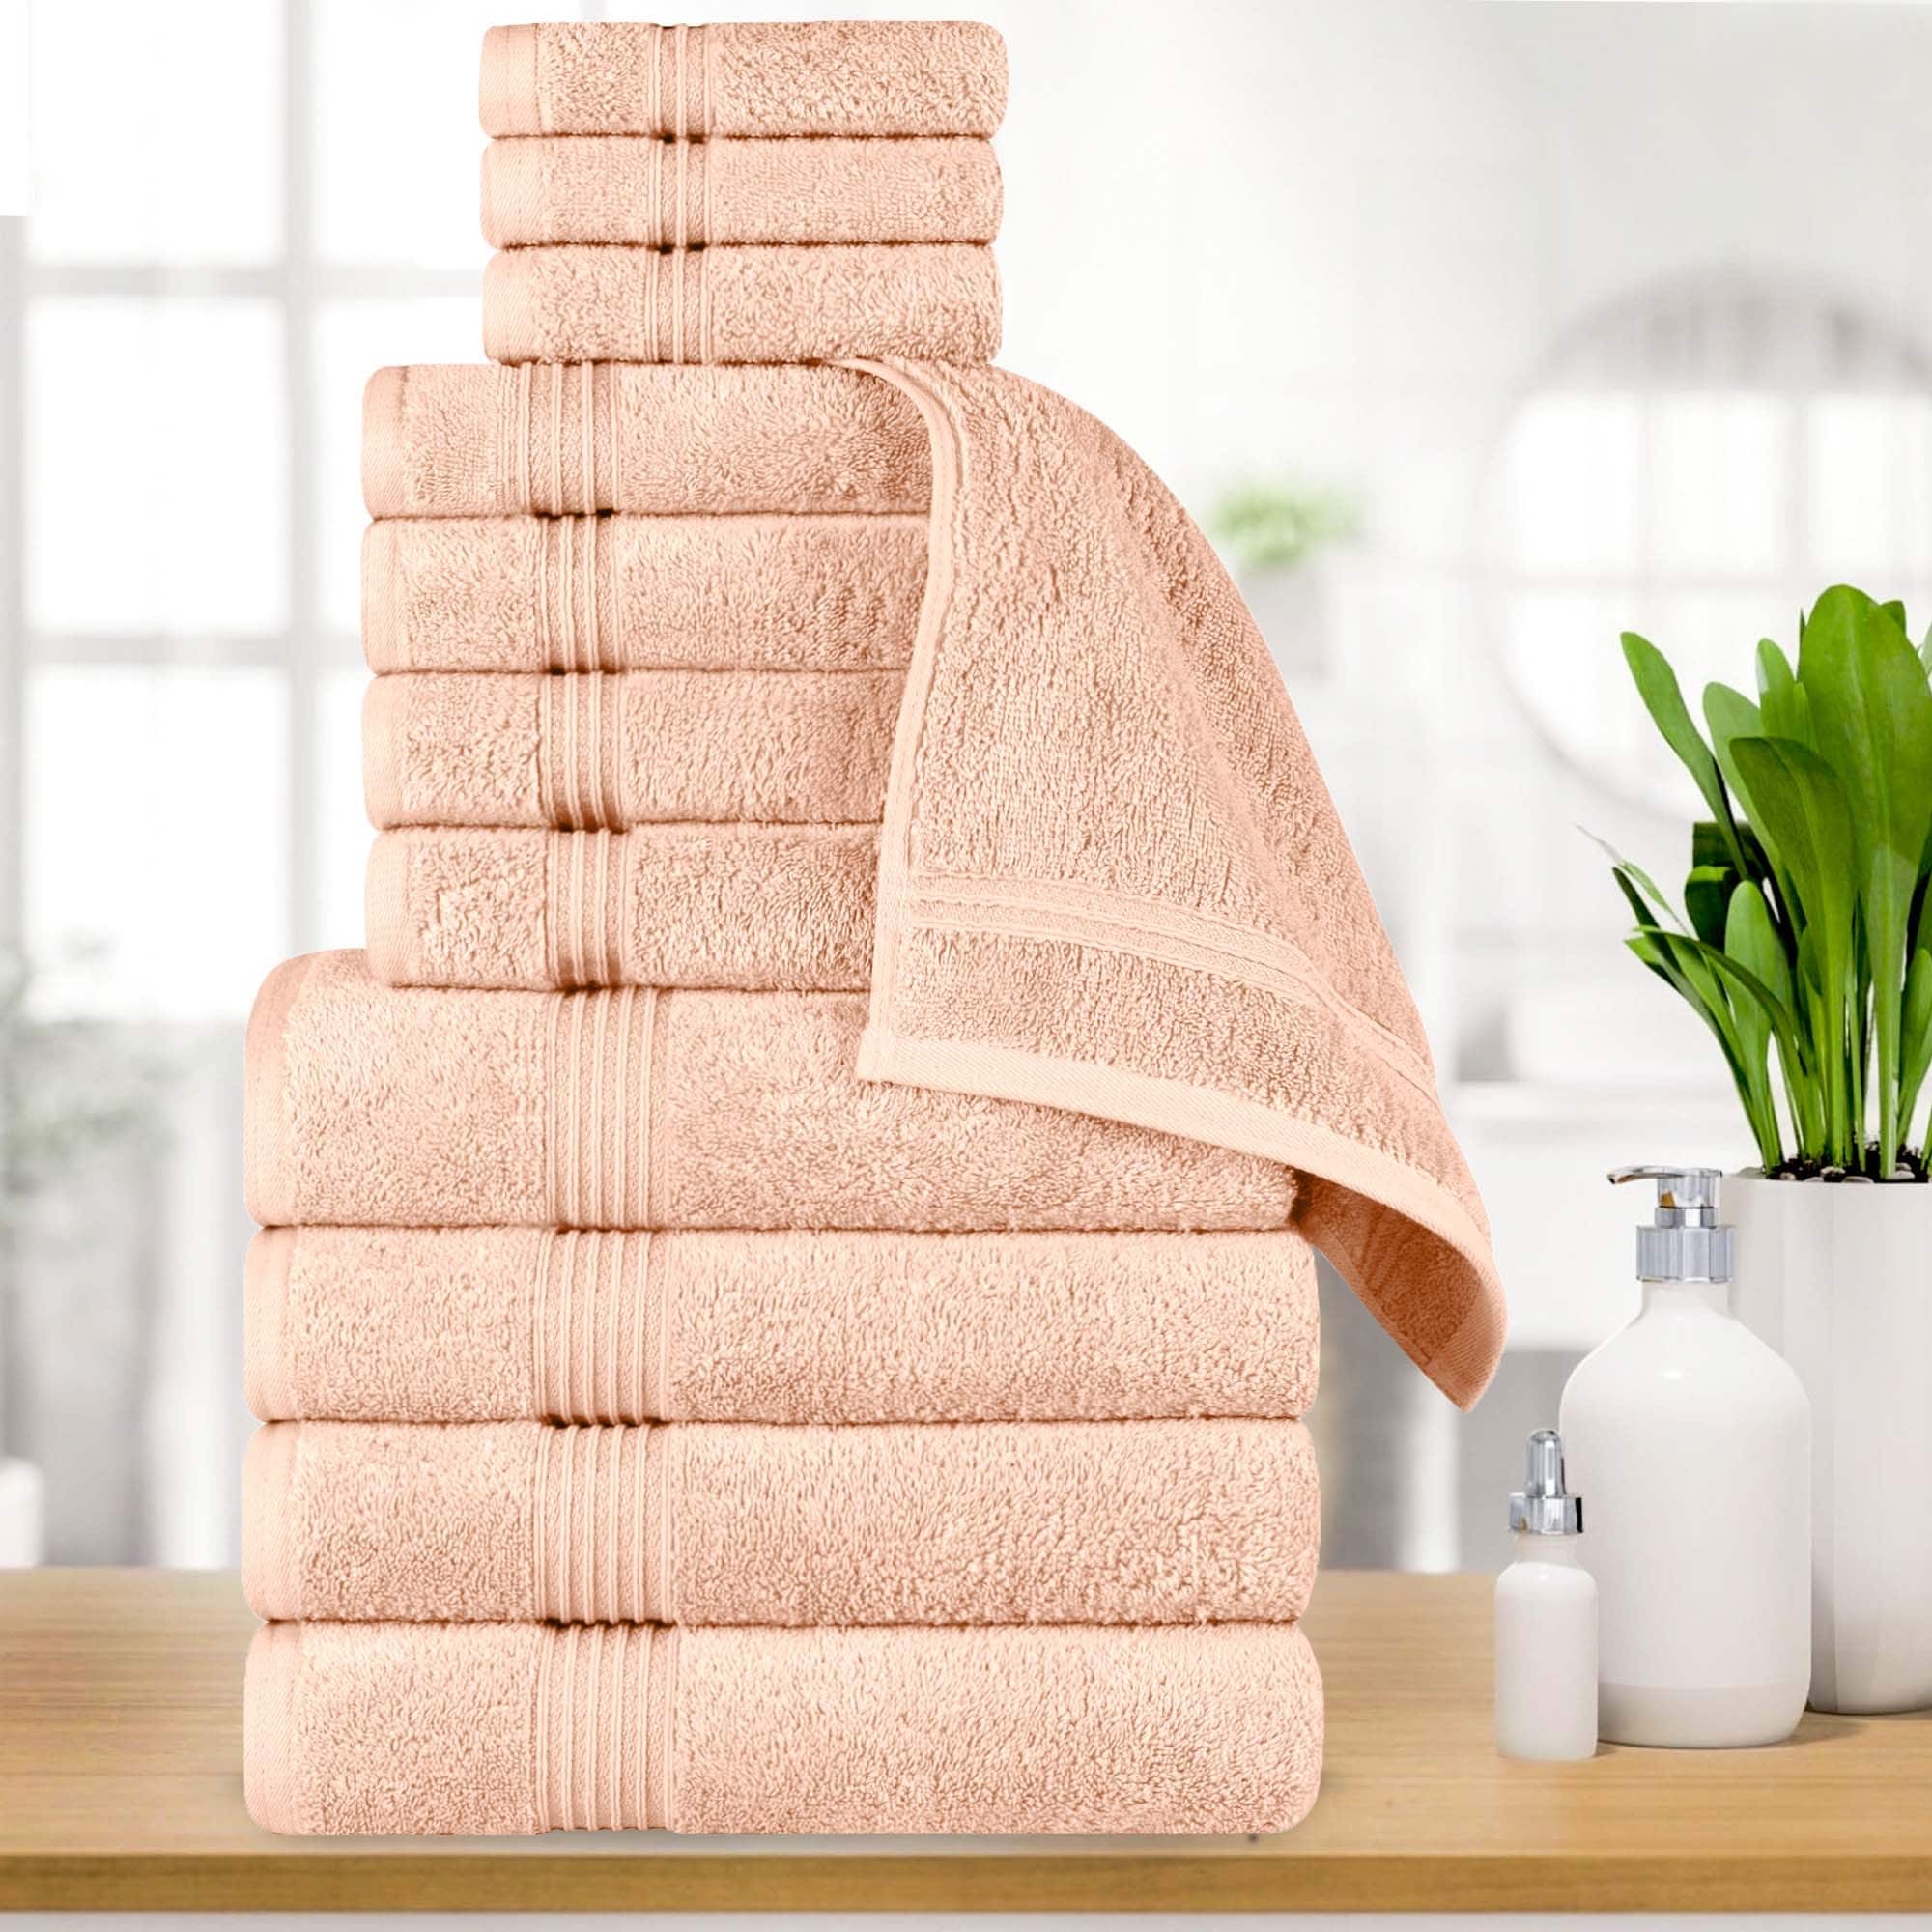 SUPERIOR Eco-Friendly Cotton 6-Piece Hand Towel Set, Small Towels for Spa,  Resort, Hotel, Guest Bath, Kitchen, Quick Dry, Soft, Bathroom Accessories